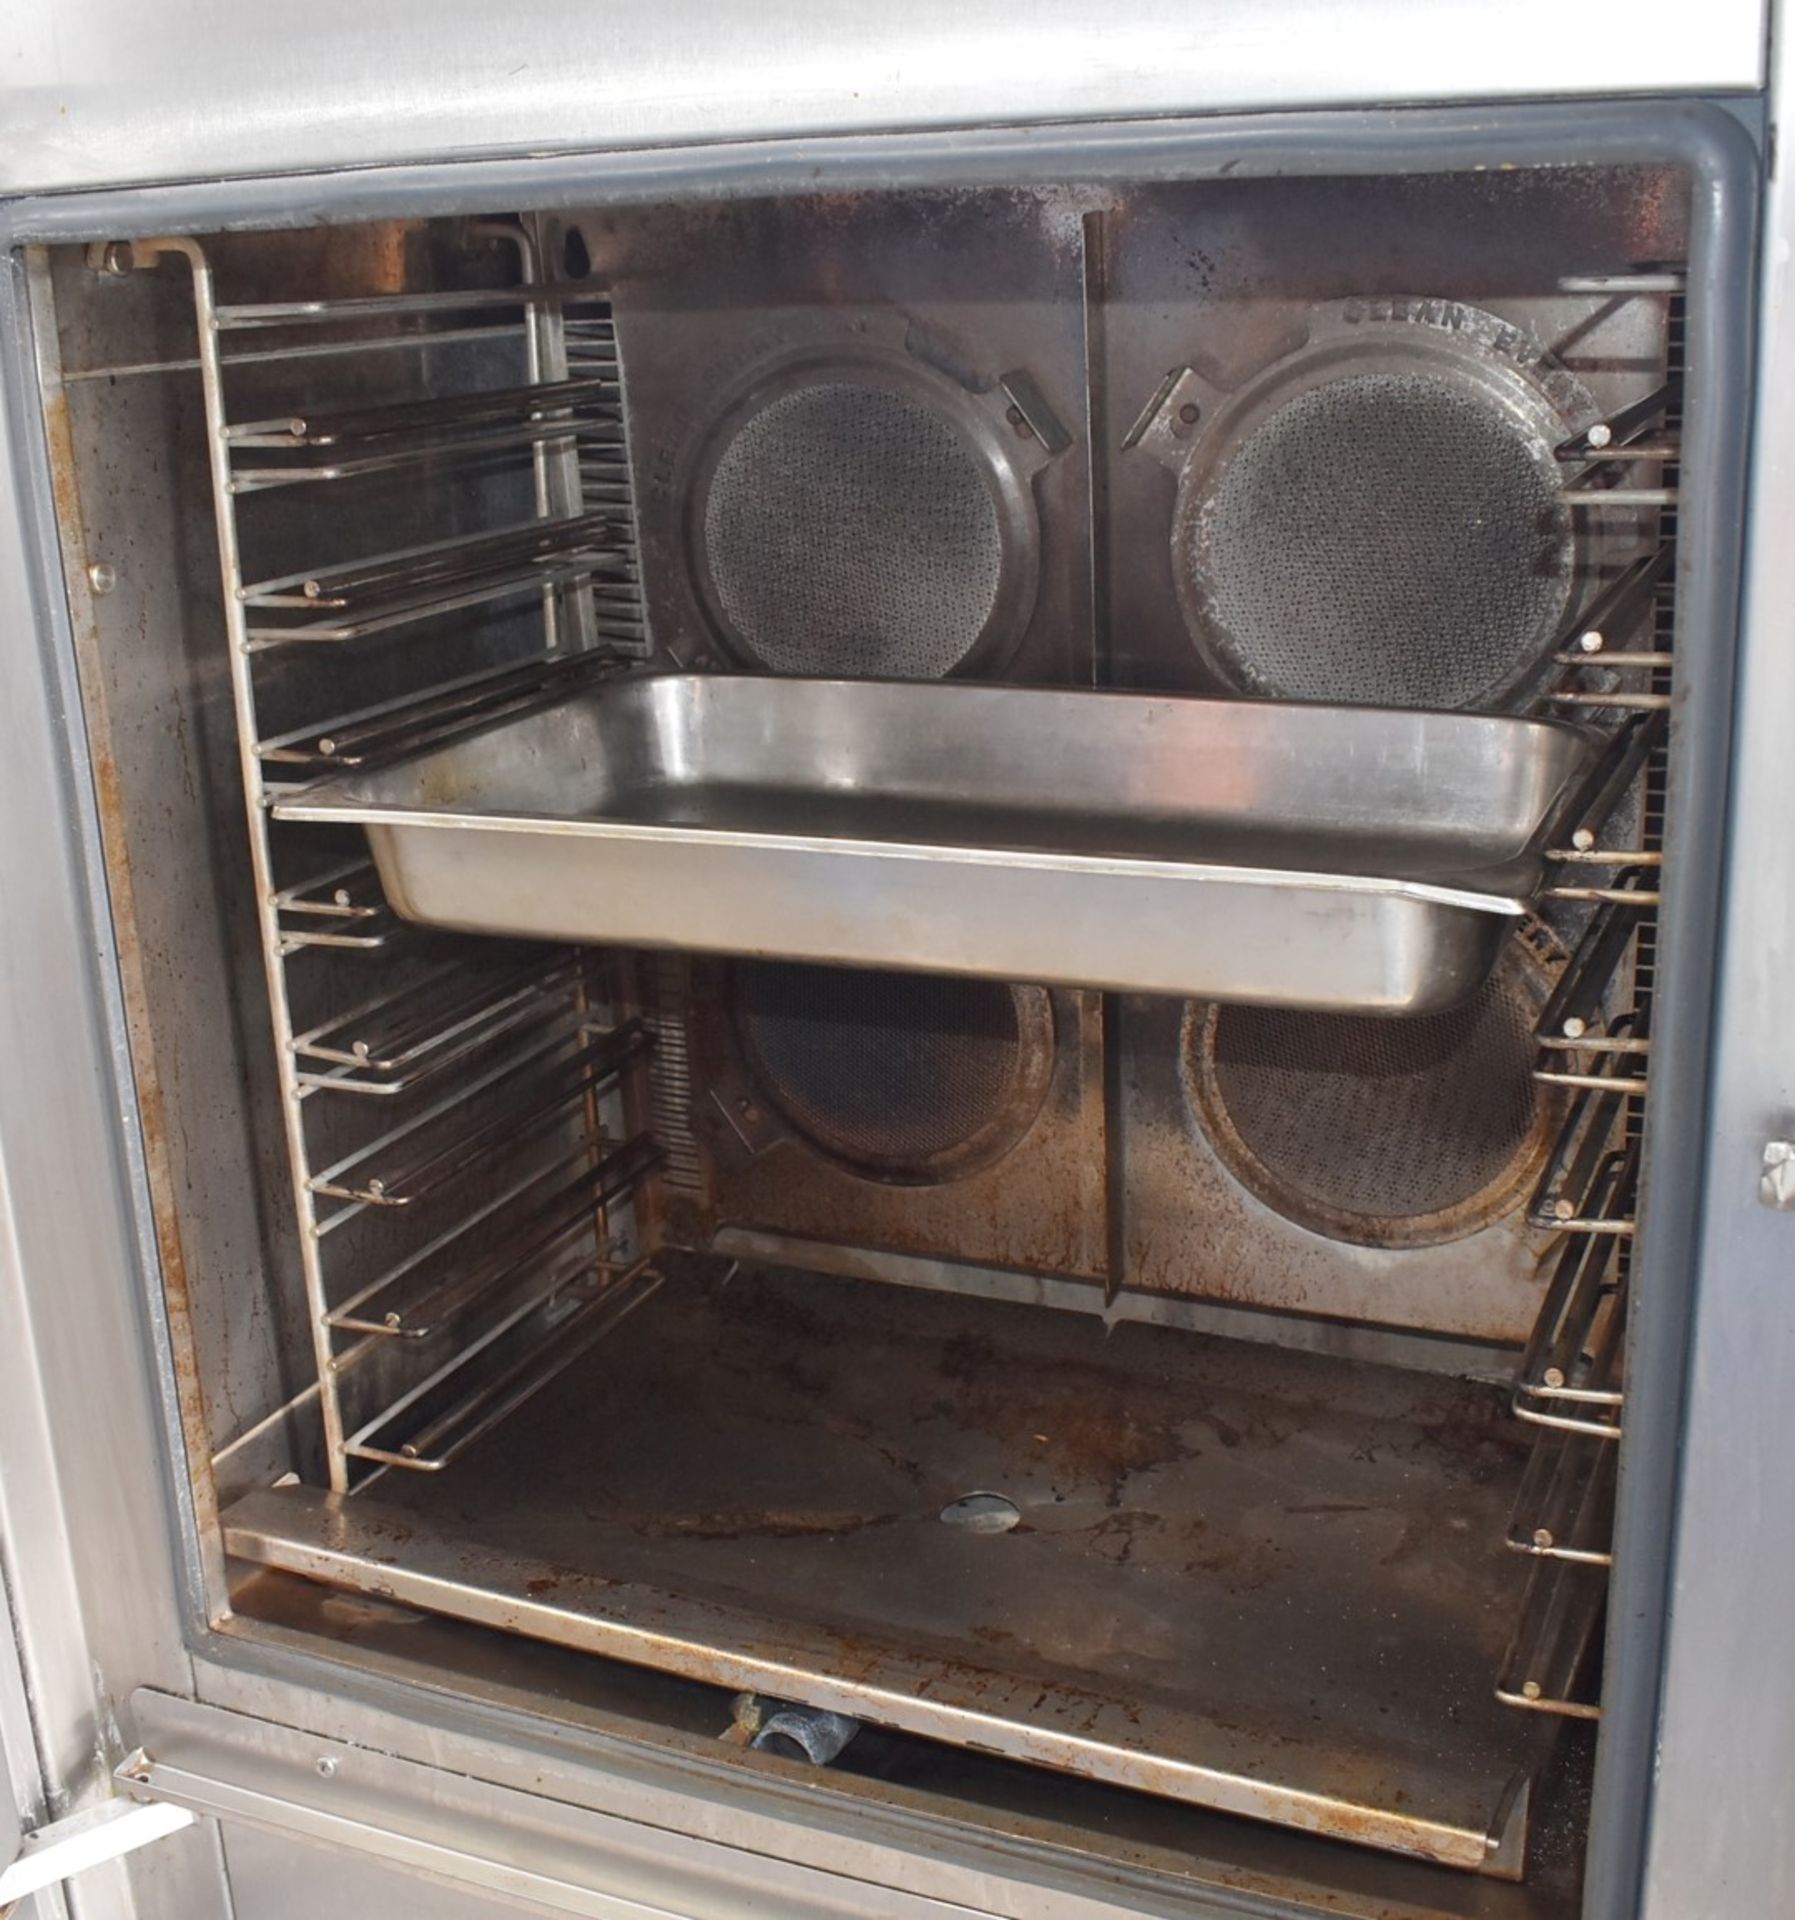 1 x Fri-Jado Turbo Retail 8 Grid Combi Oven - 3 Phase Combi Oven With Various Cooking Programs - Image 5 of 24